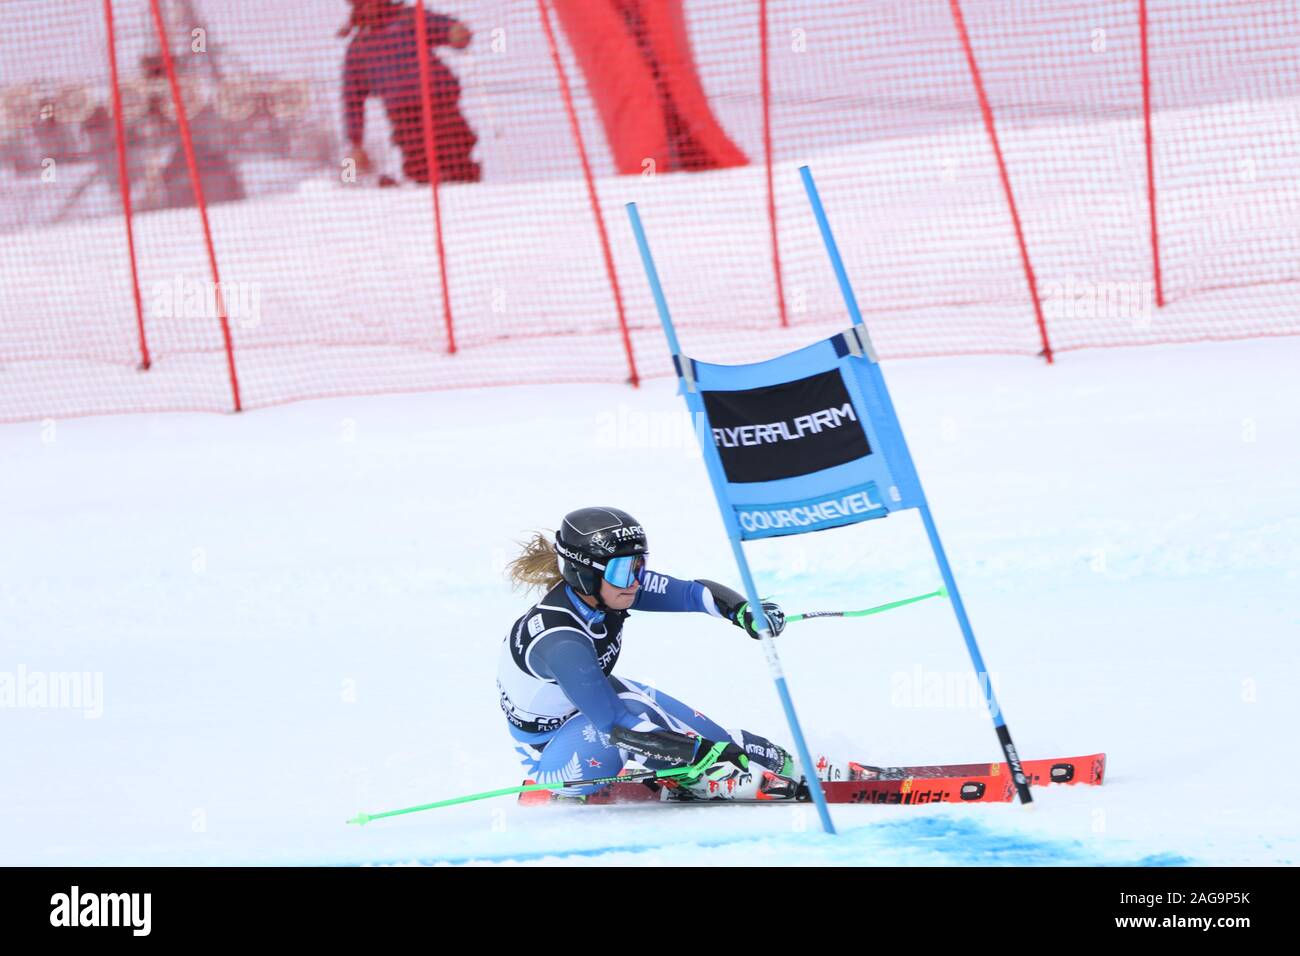 Courchevel France Dec 17 219 Alice Robinson of New Zealand competing in women's Giant Slalom Audi FIS Alpine Ski World Cup 2019/20 Skiing Wintersports Stock Photo